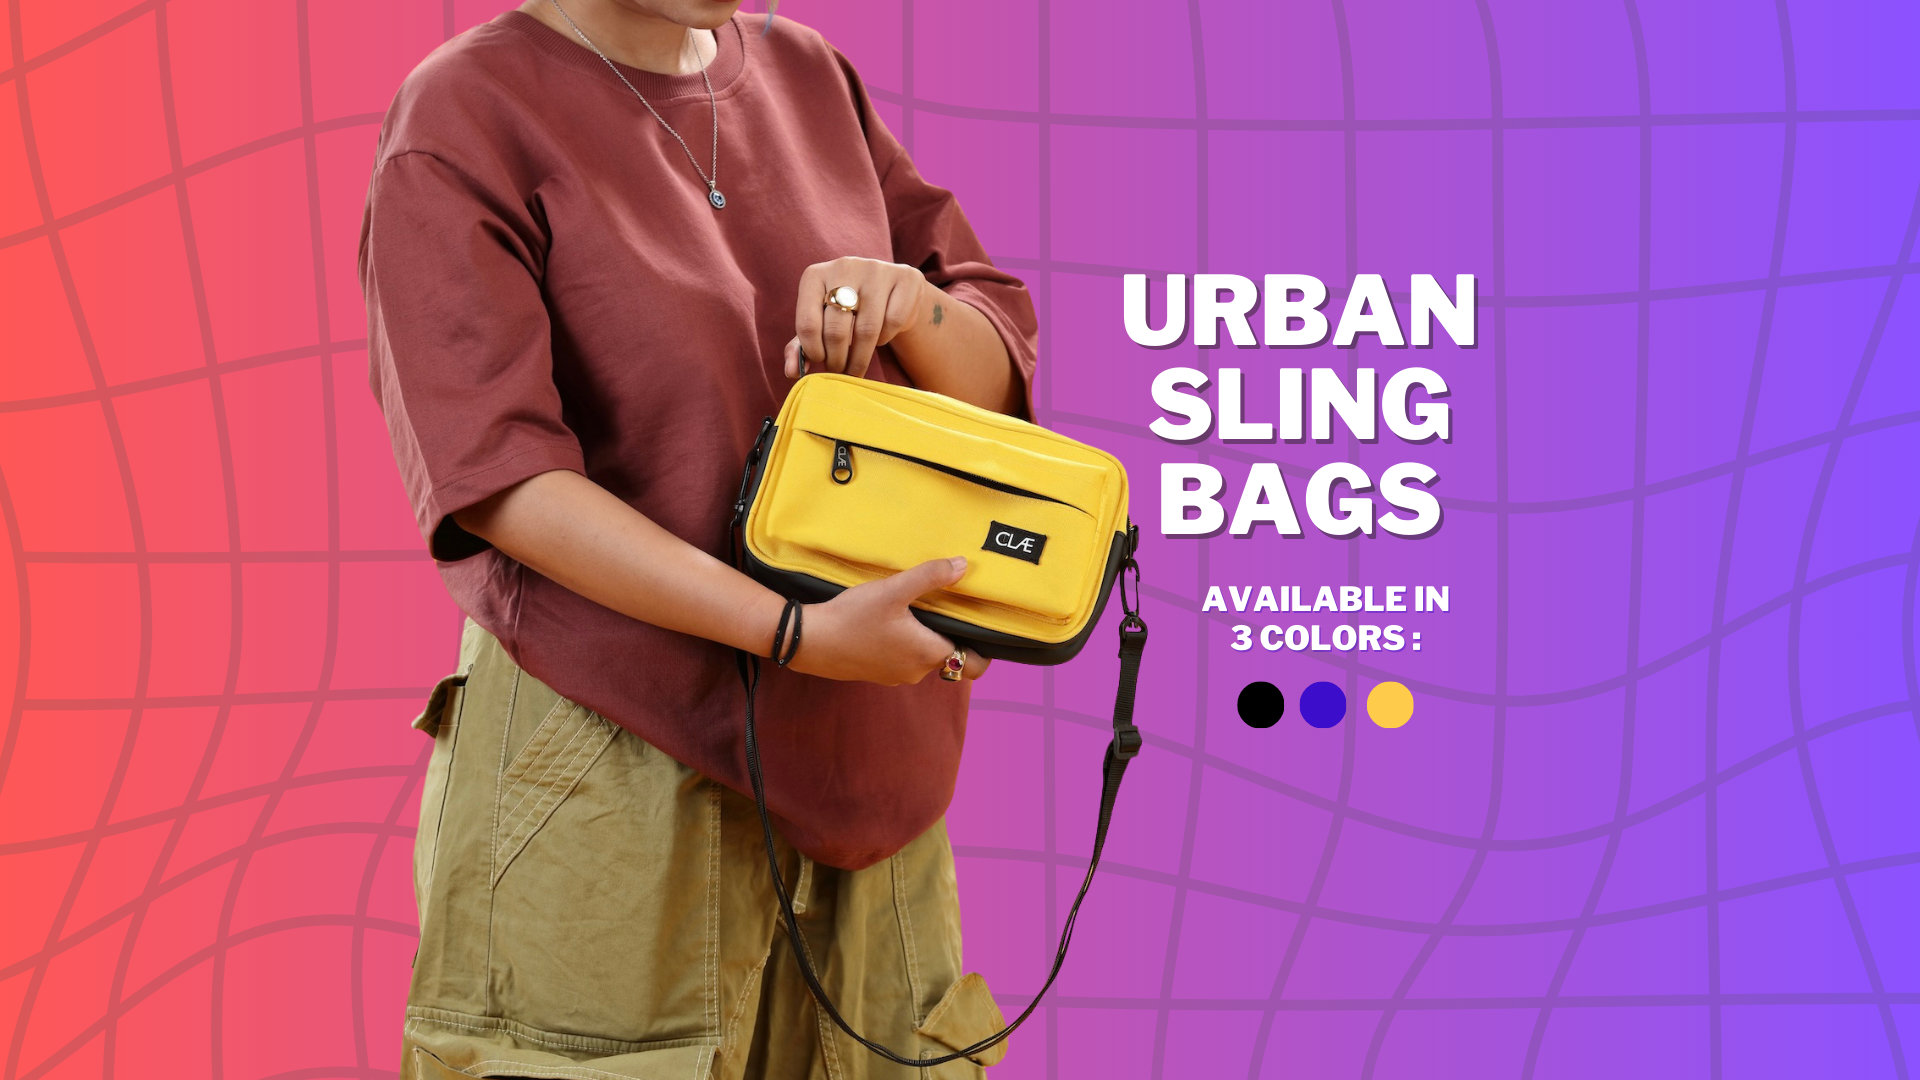 A person holding the sling bag, showcasing the storage and utility of the urban slings bag. Available in 3 different colors.